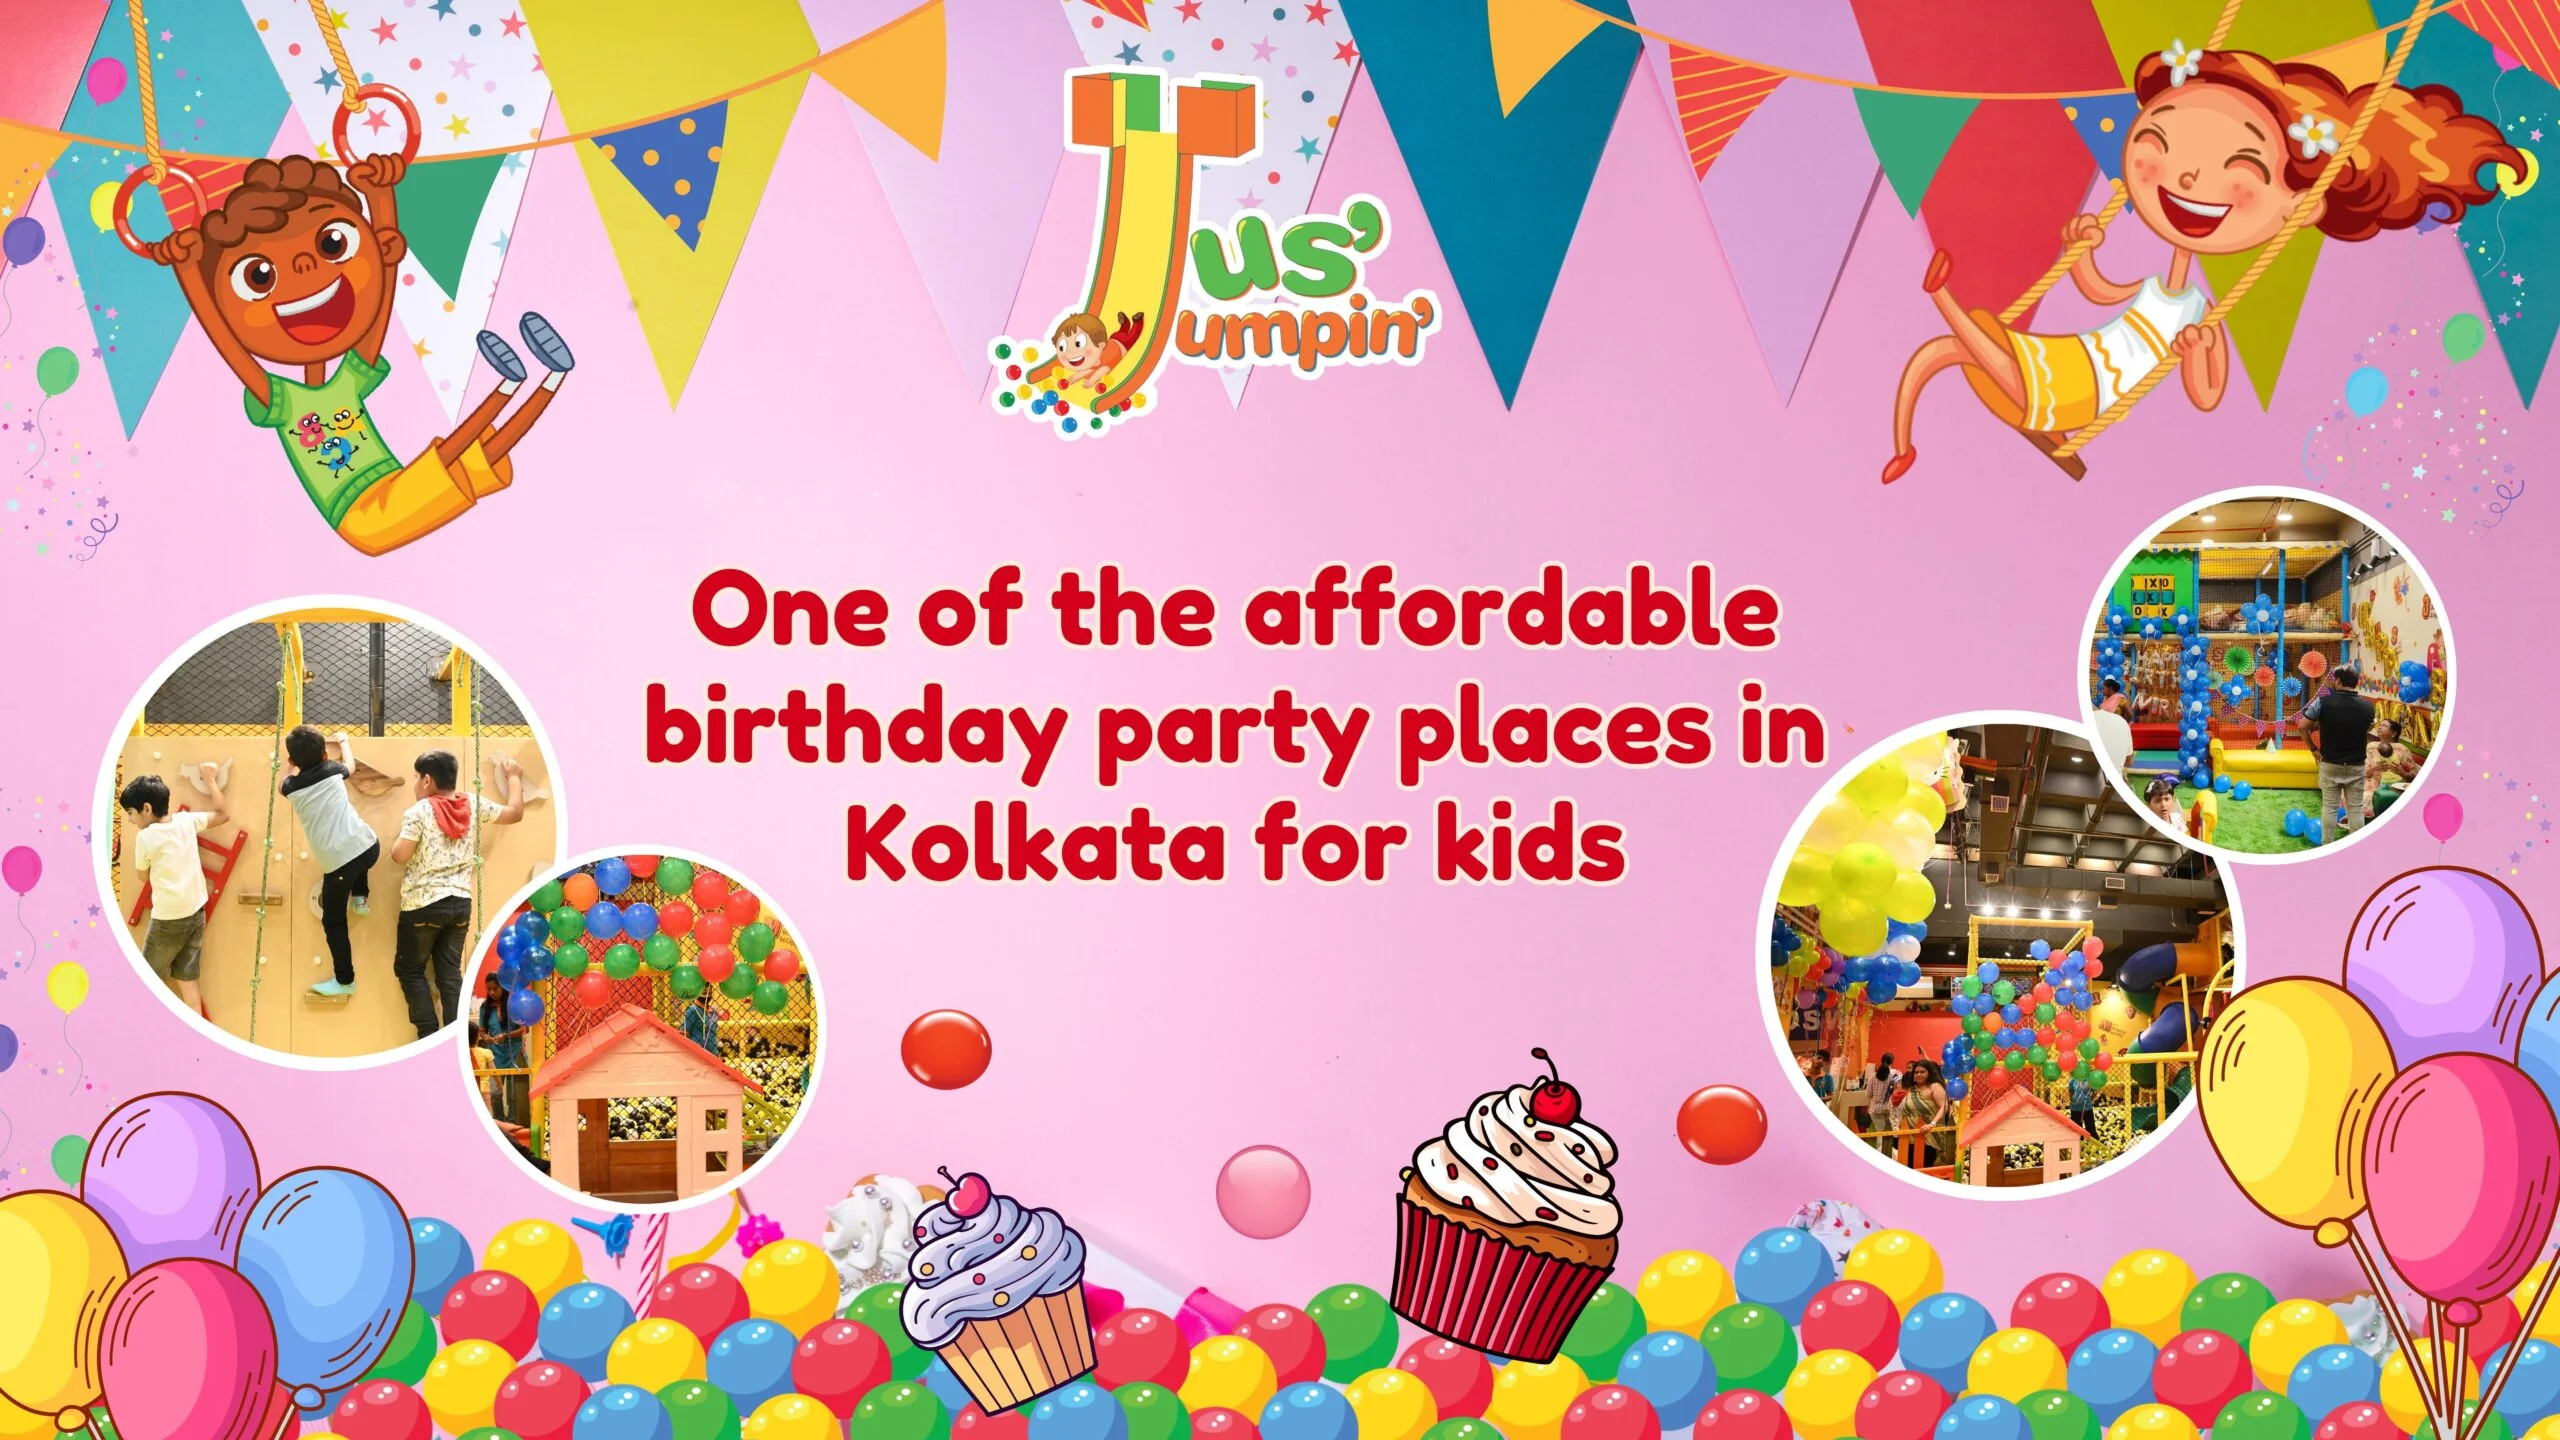 You are currently viewing Jus Jumpin: One of the affordable birthday party places in Kolkata for kids